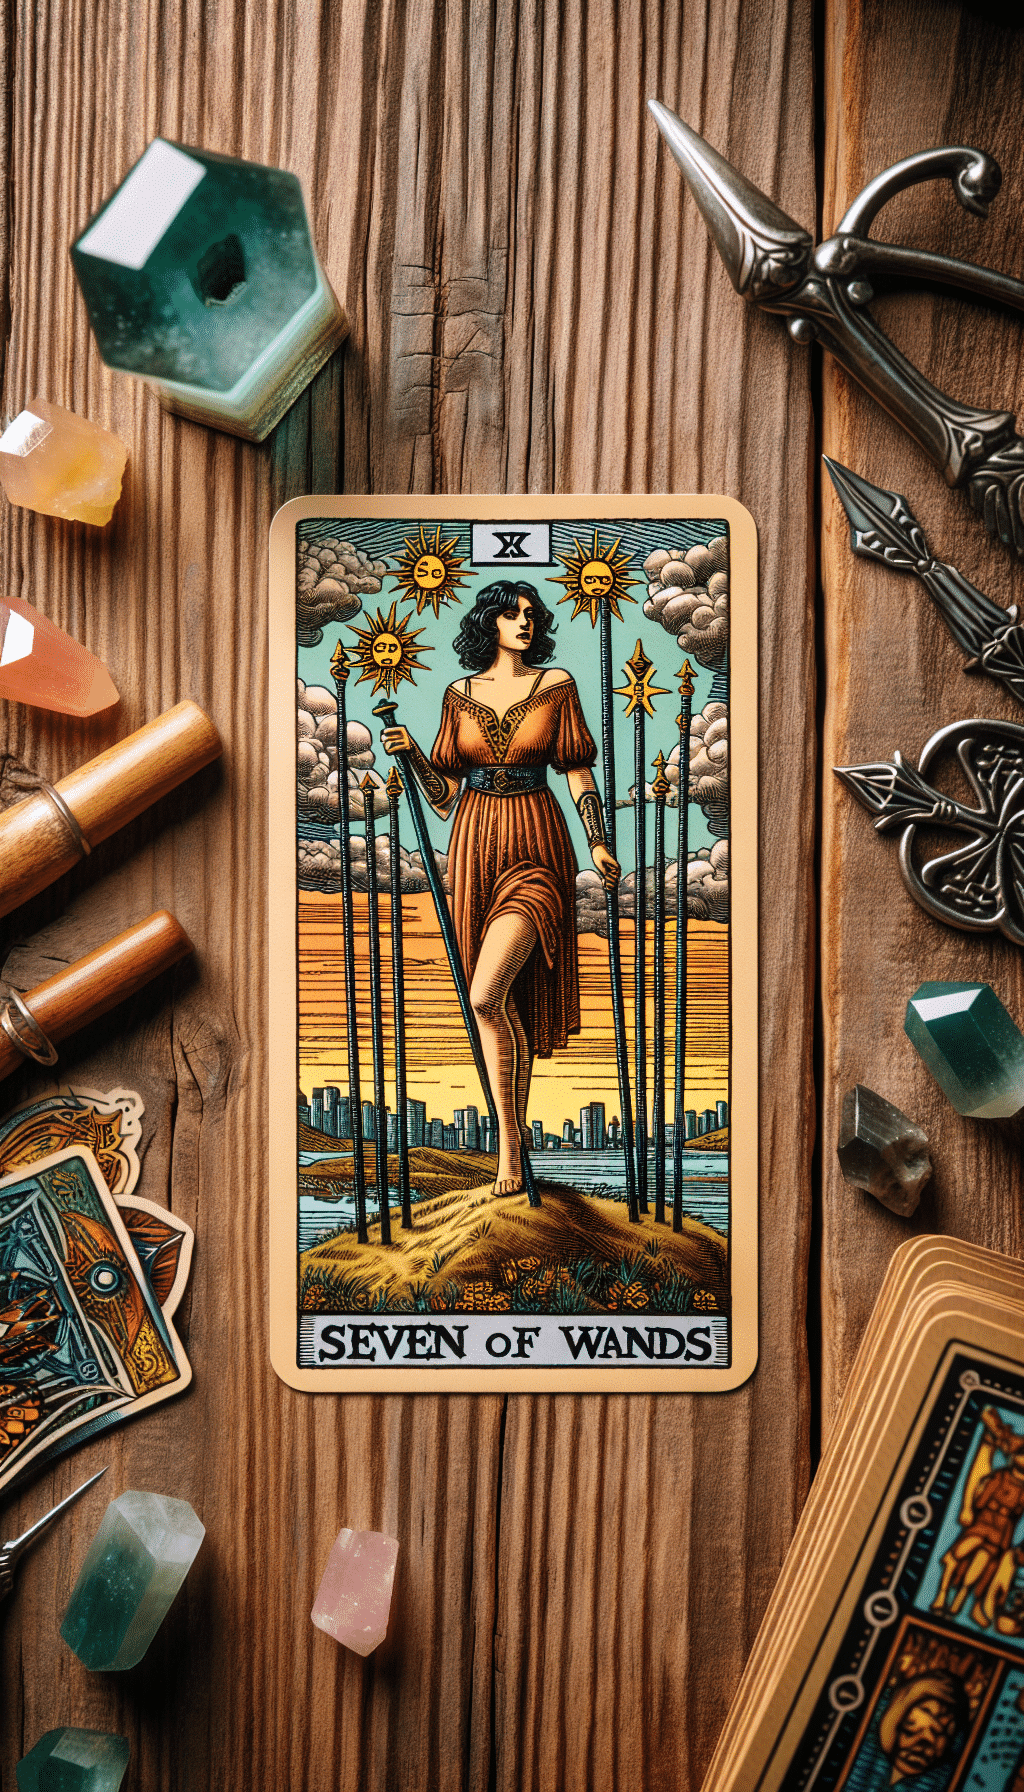 The Seven of Wands: Standing Strong in the Face of Adversity